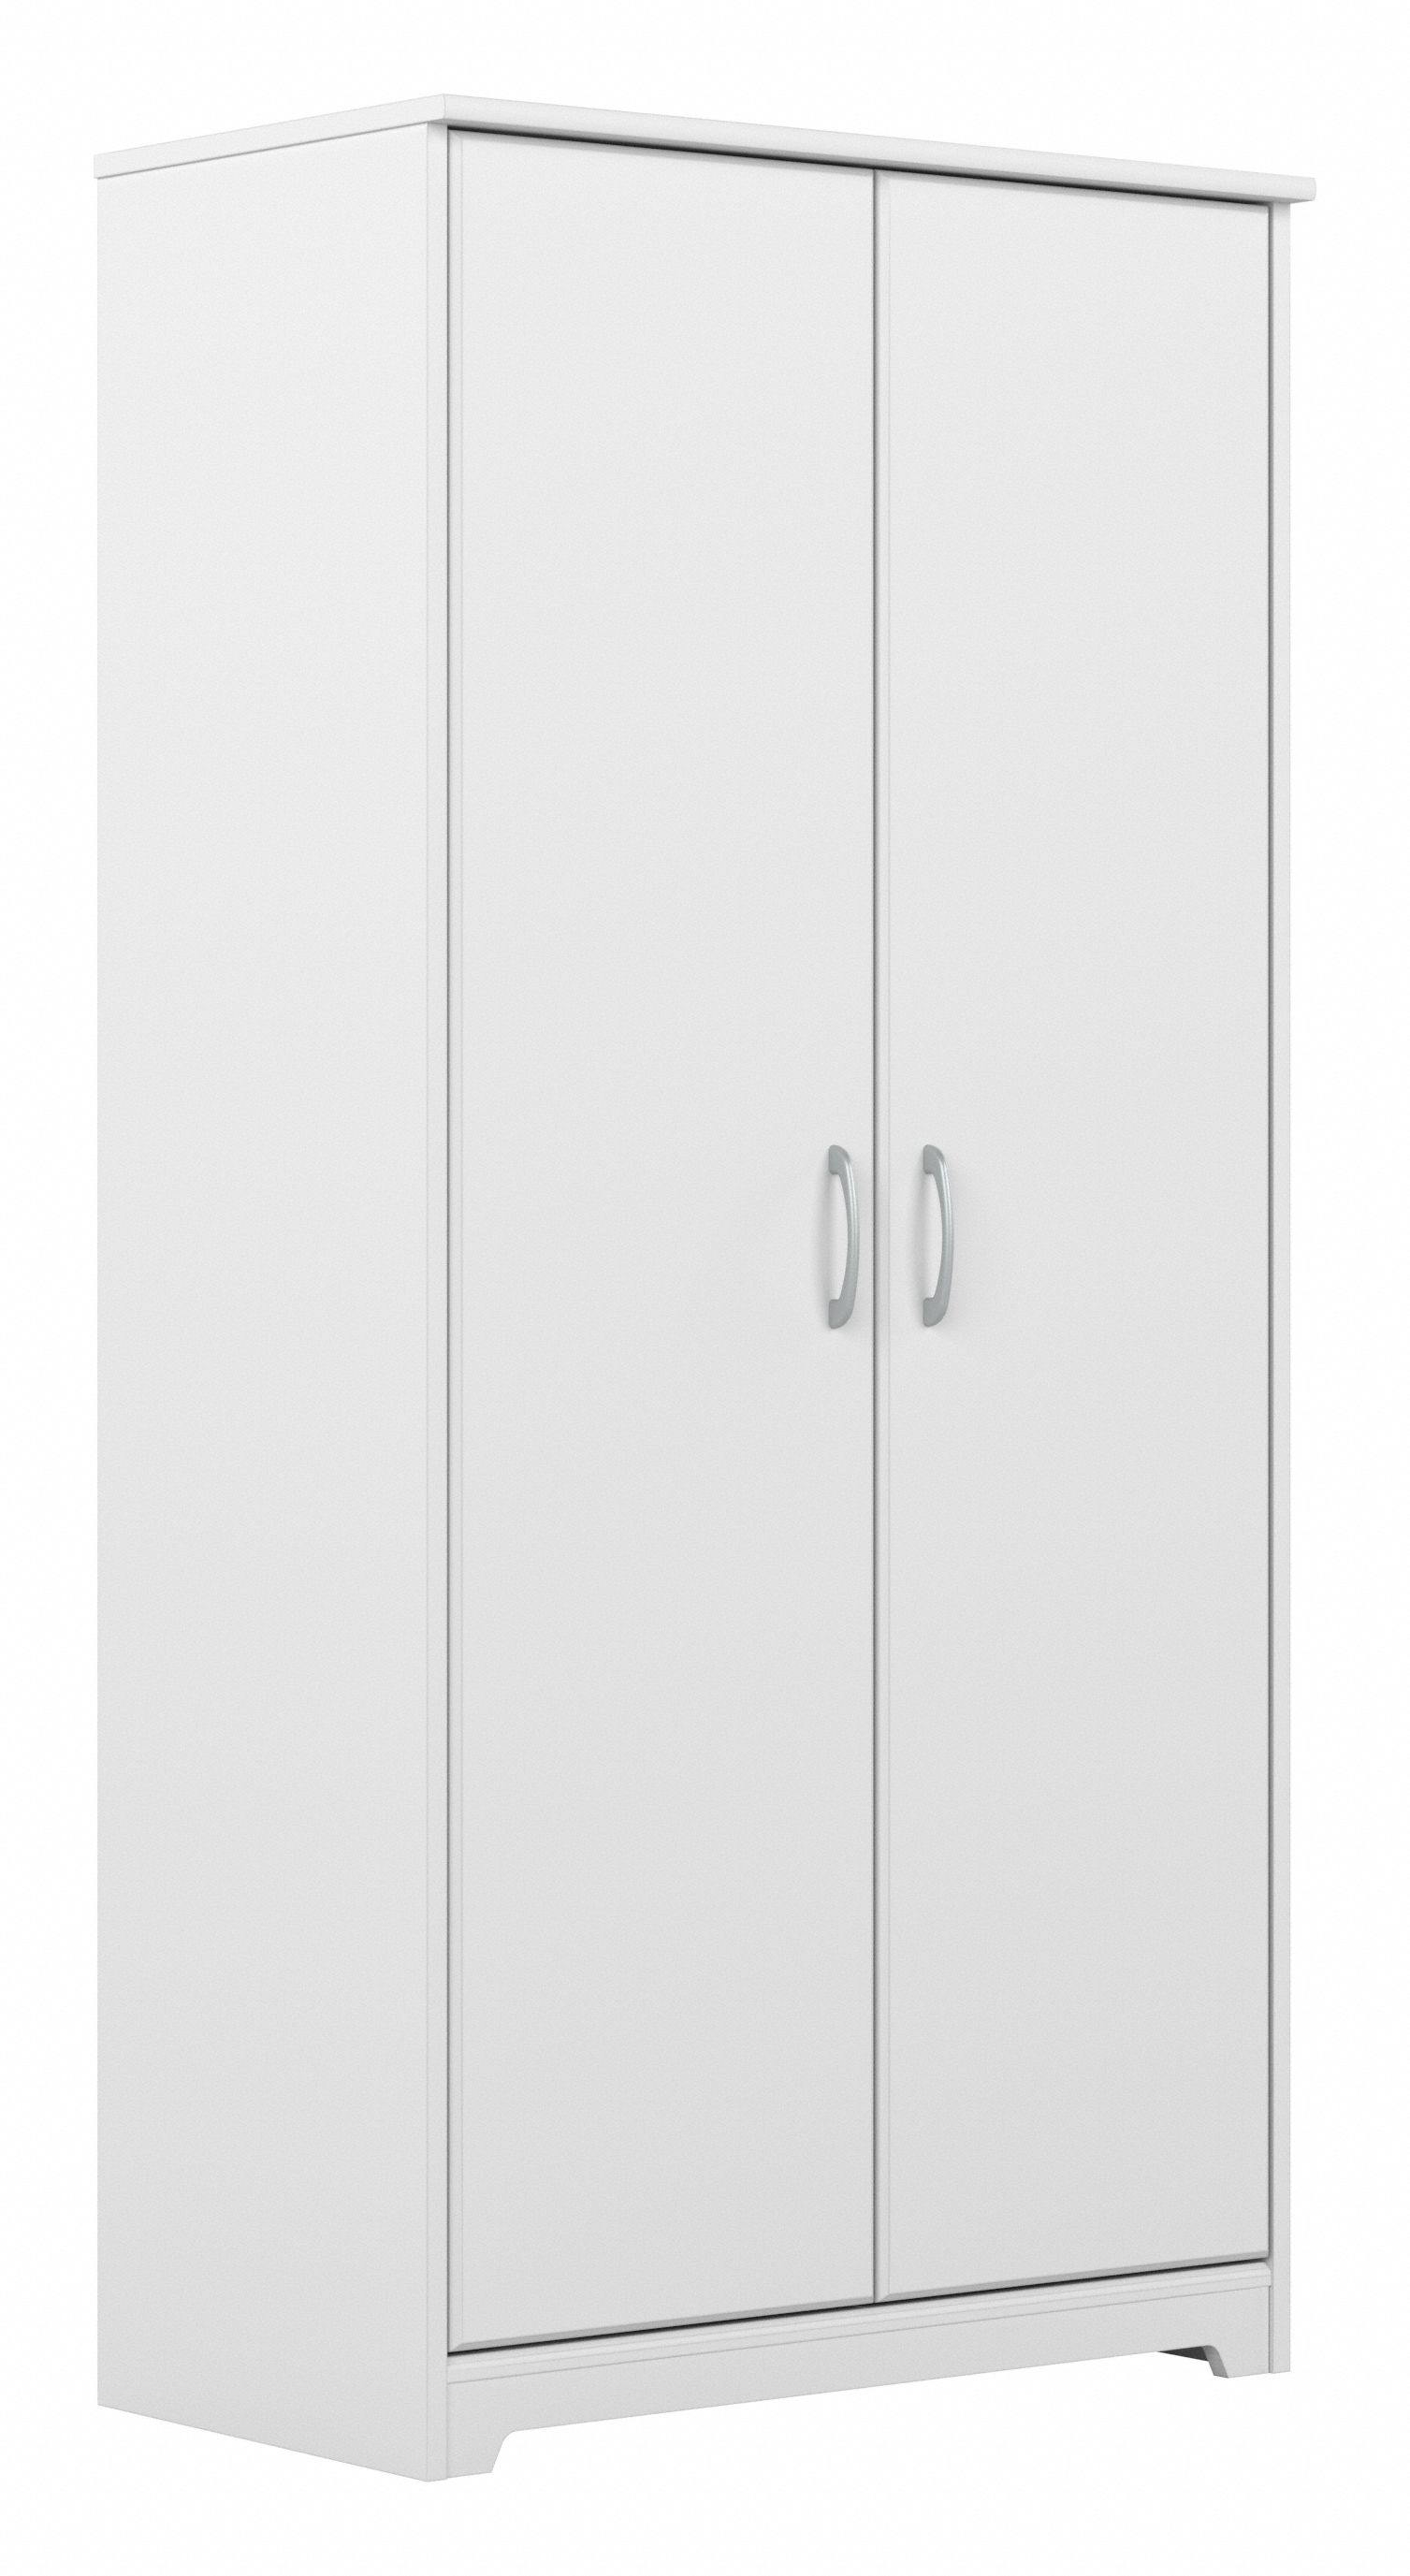 Shop Bush Furniture Cabot Tall Bathroom Storage Cabinet with Doors 02 WC31999-Z1 #color_white